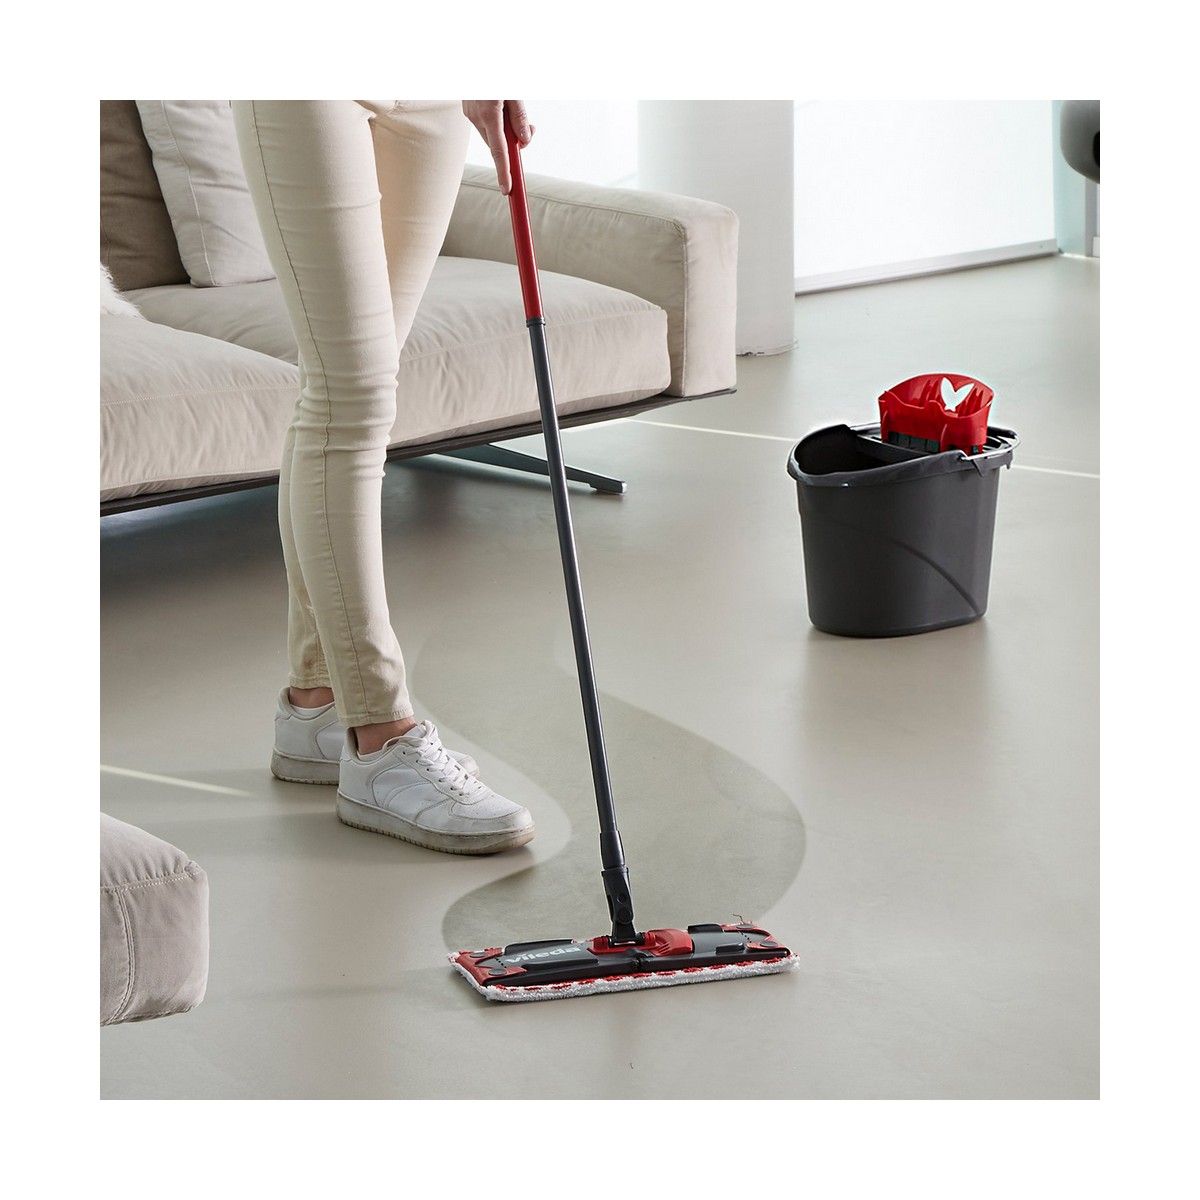 How to clean your floors with the Vileda UltraMax and Bucket, mop, bucket